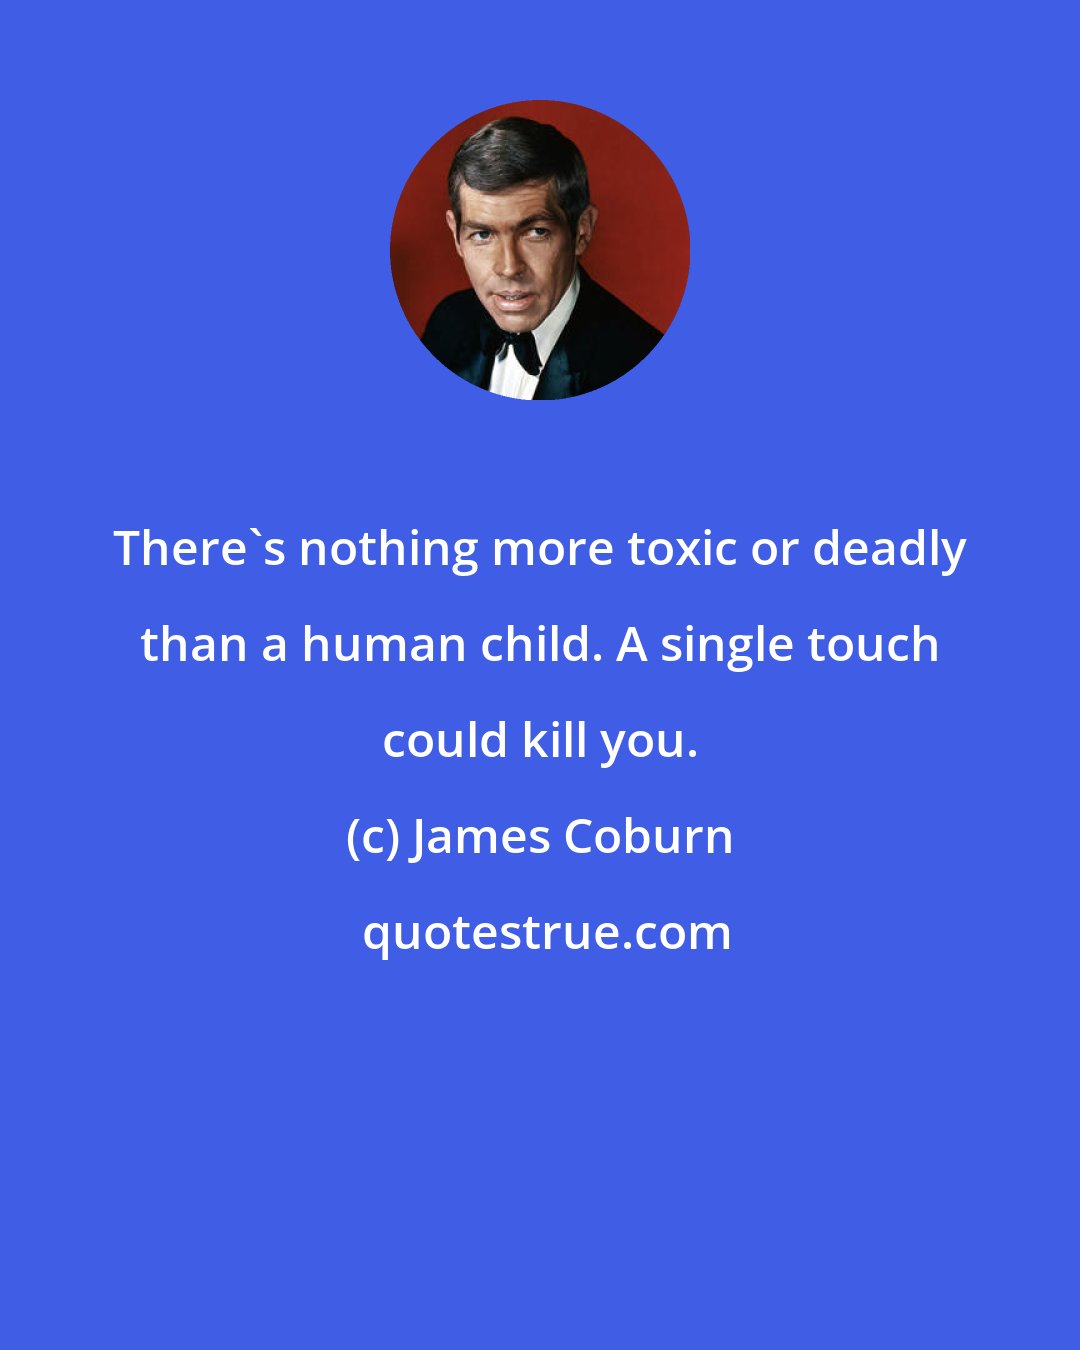 James Coburn: There's nothing more toxic or deadly than a human child. A single touch could kill you.